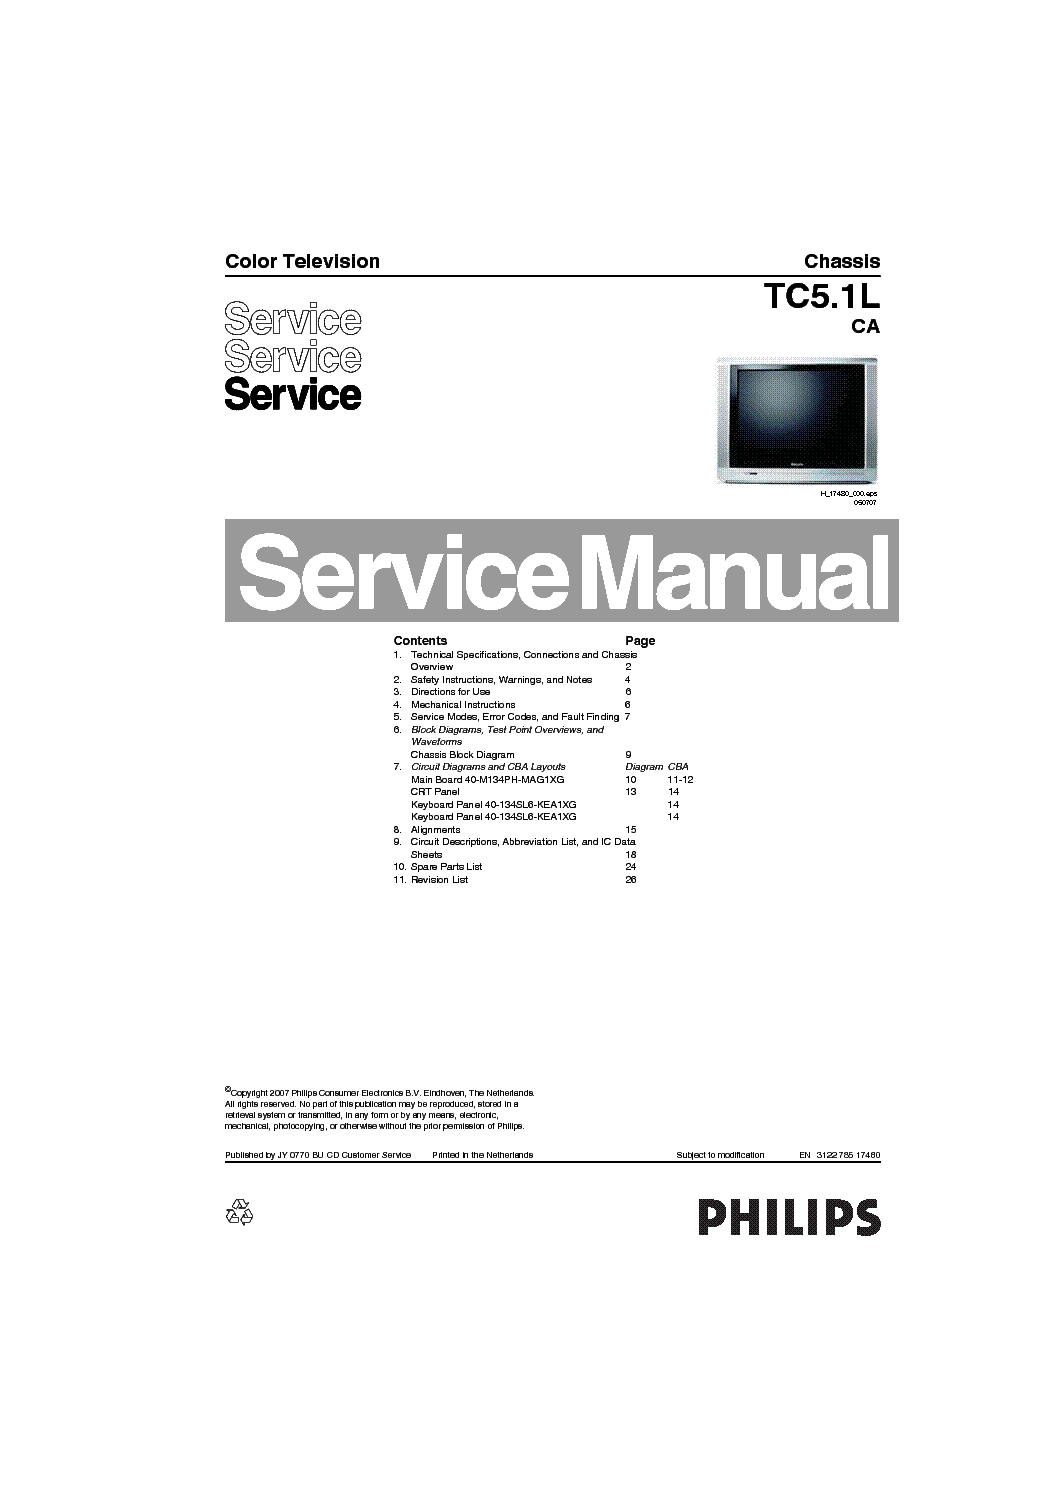 PHILIPS 29PT6667 CHASSIS TC5.1L-CA SM service manual (1st page)